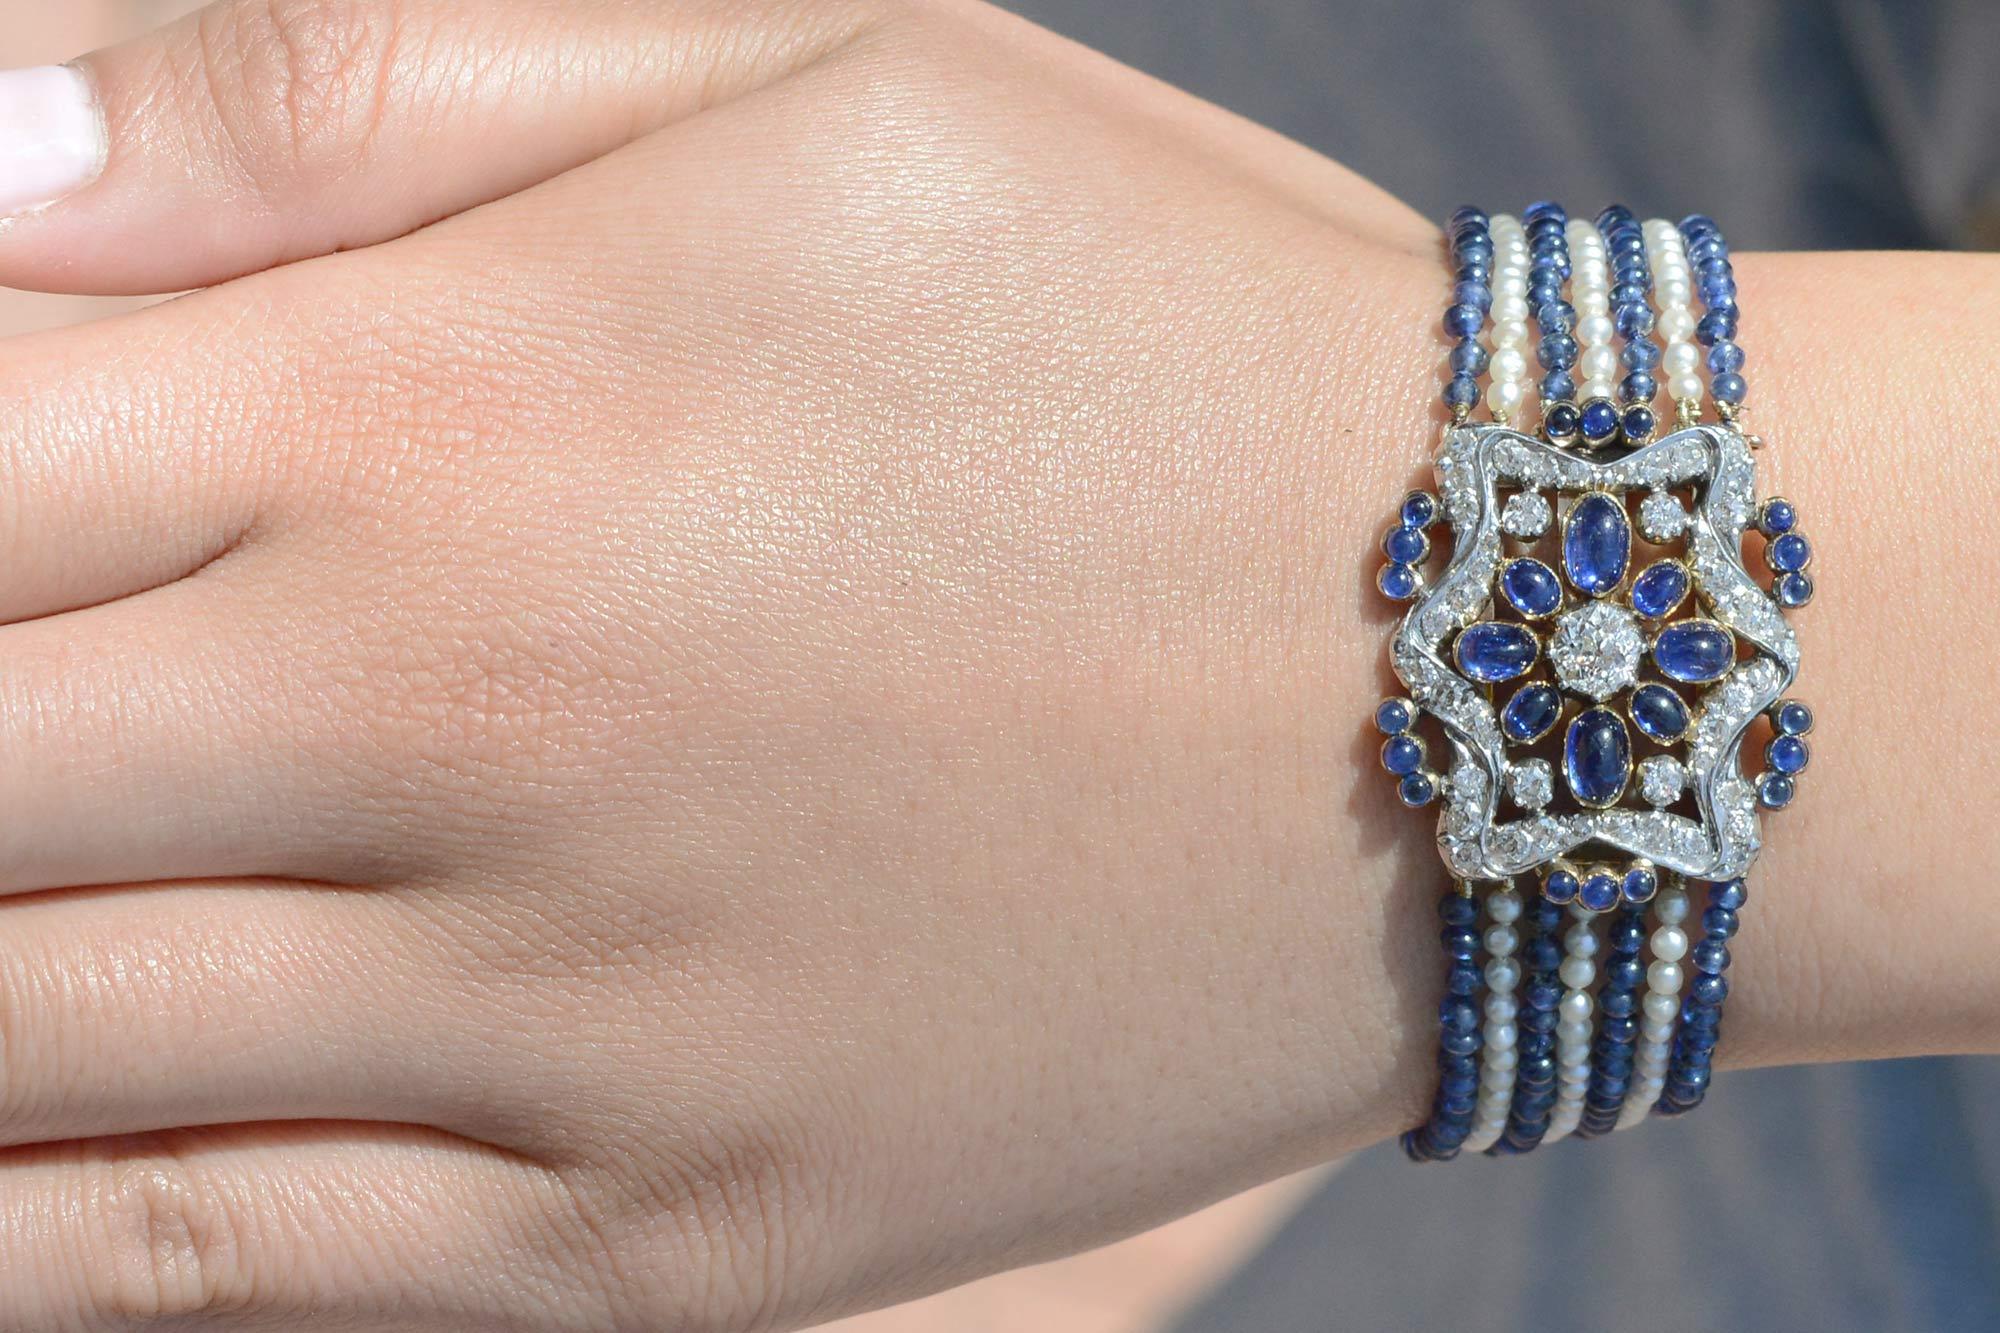 A resplendent member of history, this authentic Belle Époque bracelet is complete with French hallmarks providing an over 100 year old provenance. The seven alternating strands of seed pearls and sapphire beads leading to a decorative star medallion